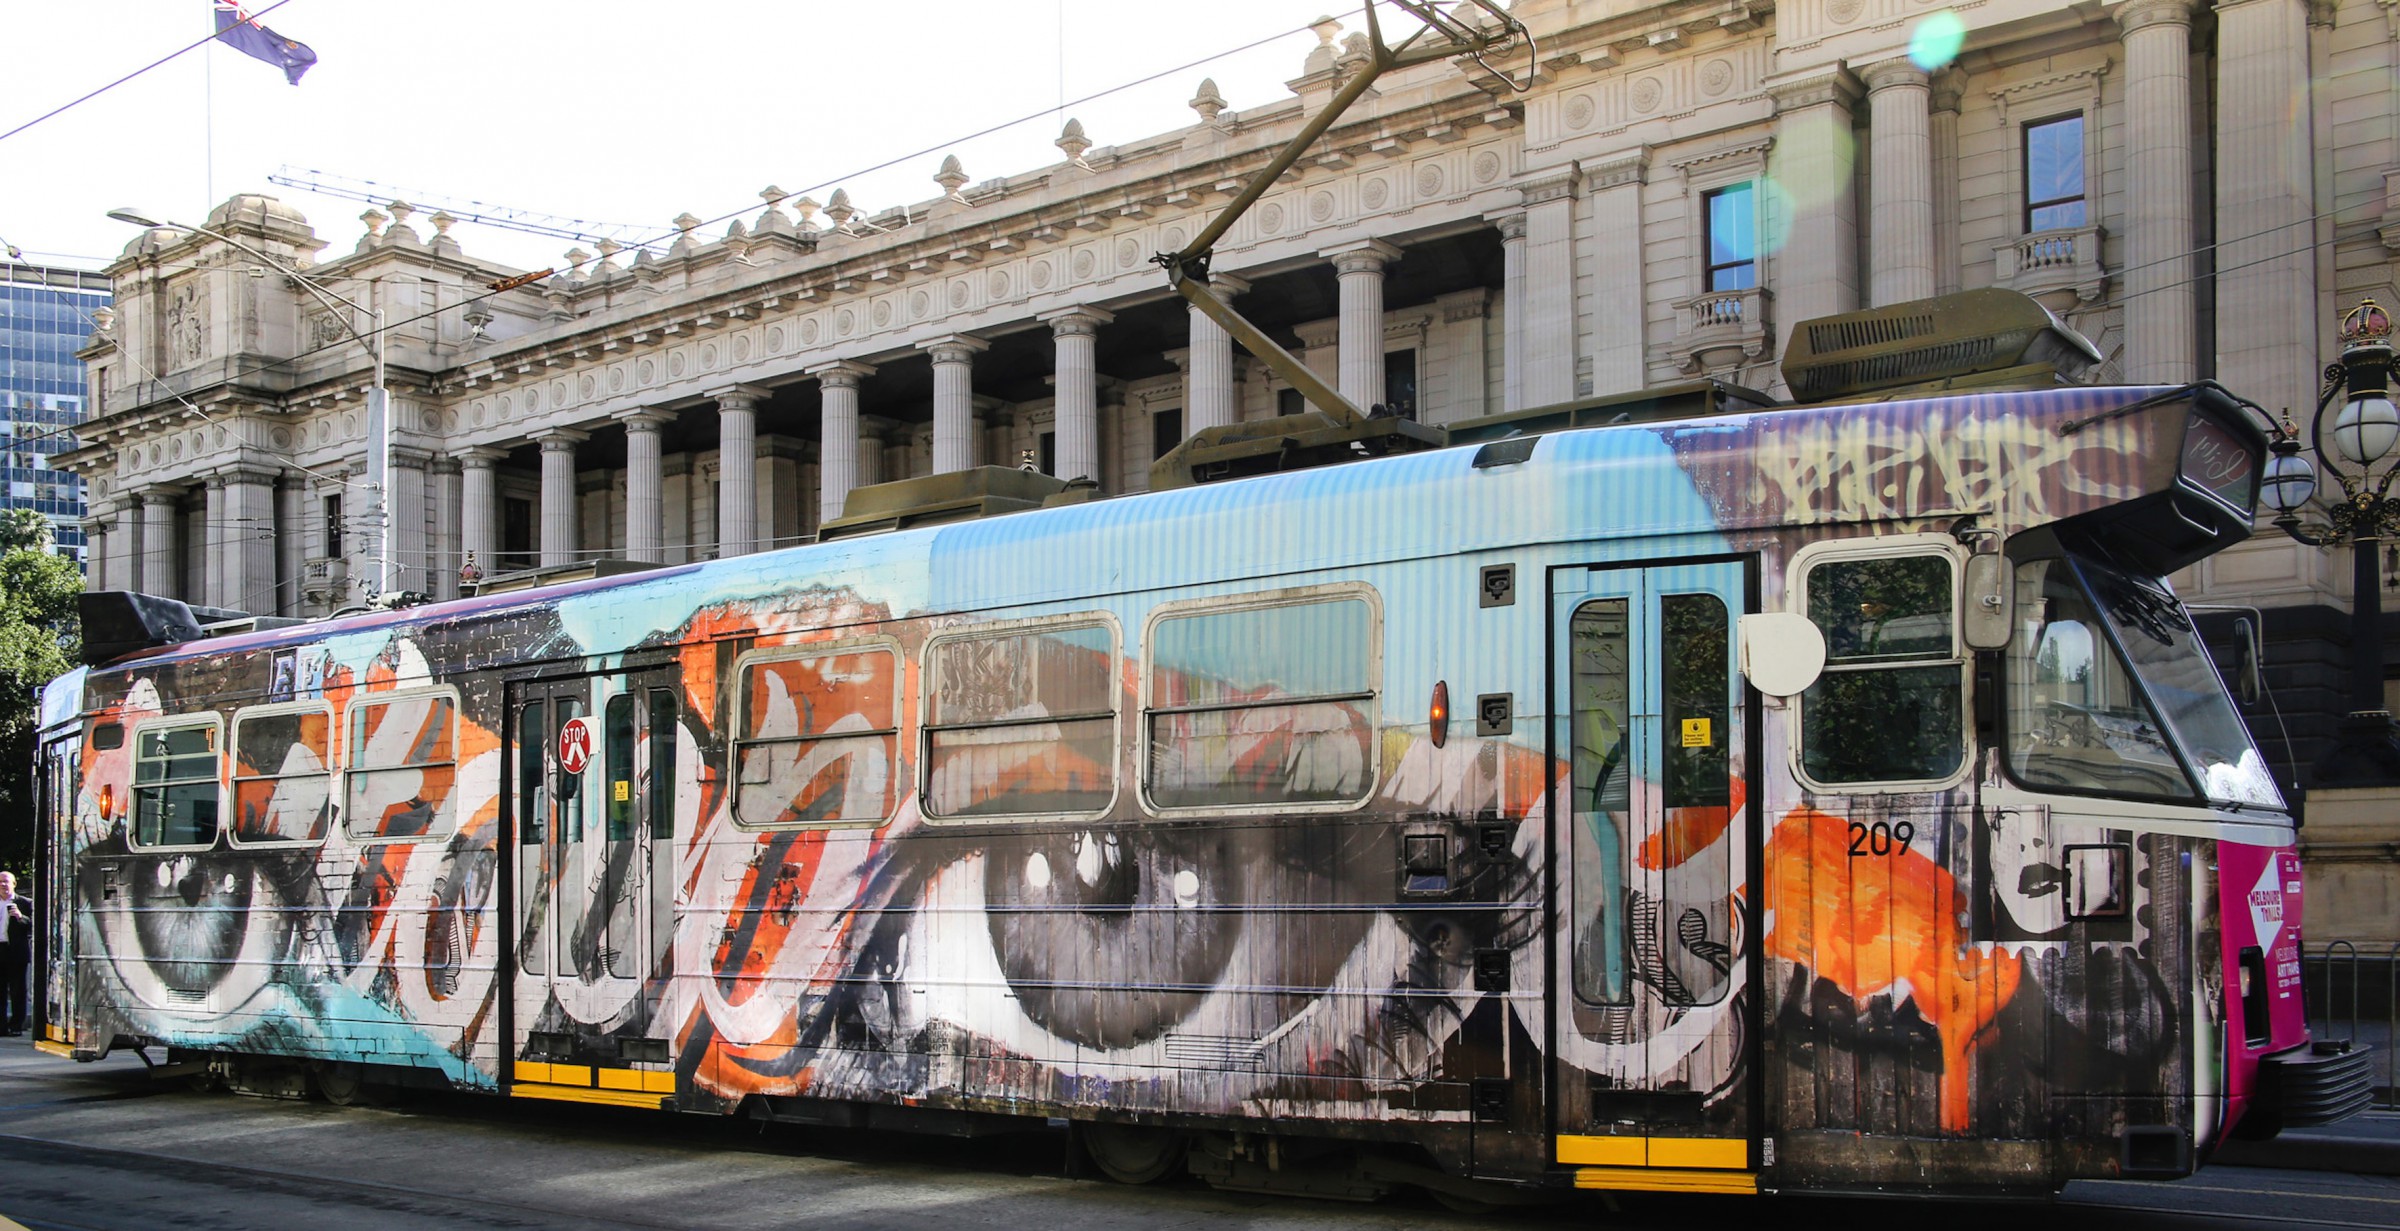 A tram painted with a pair of eyes and colourful accents